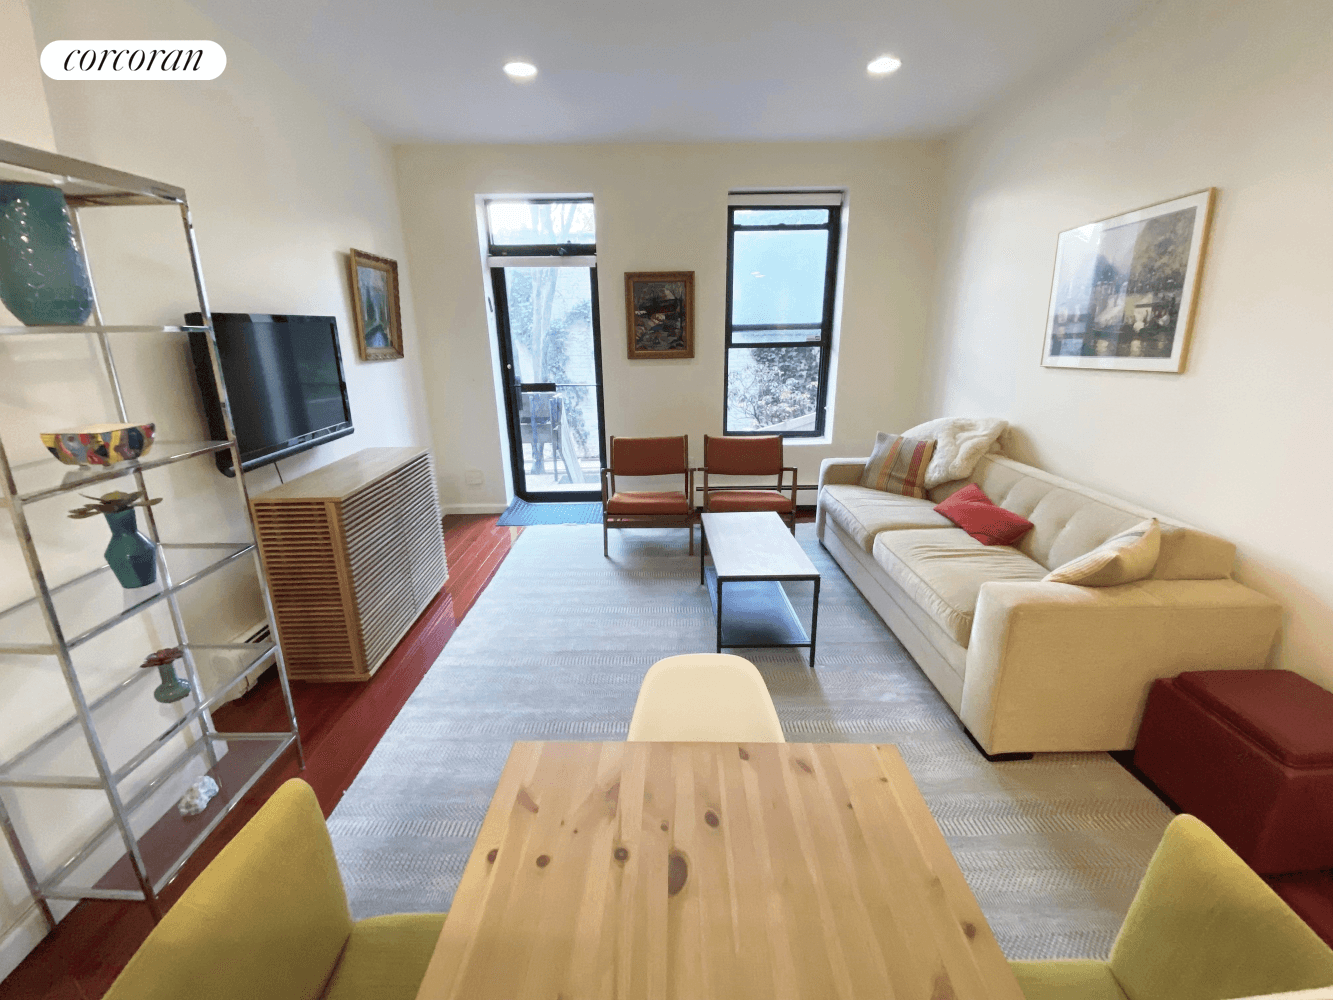 Rare opportunity to own a one bedroom apartment with private outdoor space in the heart of Park Slope !